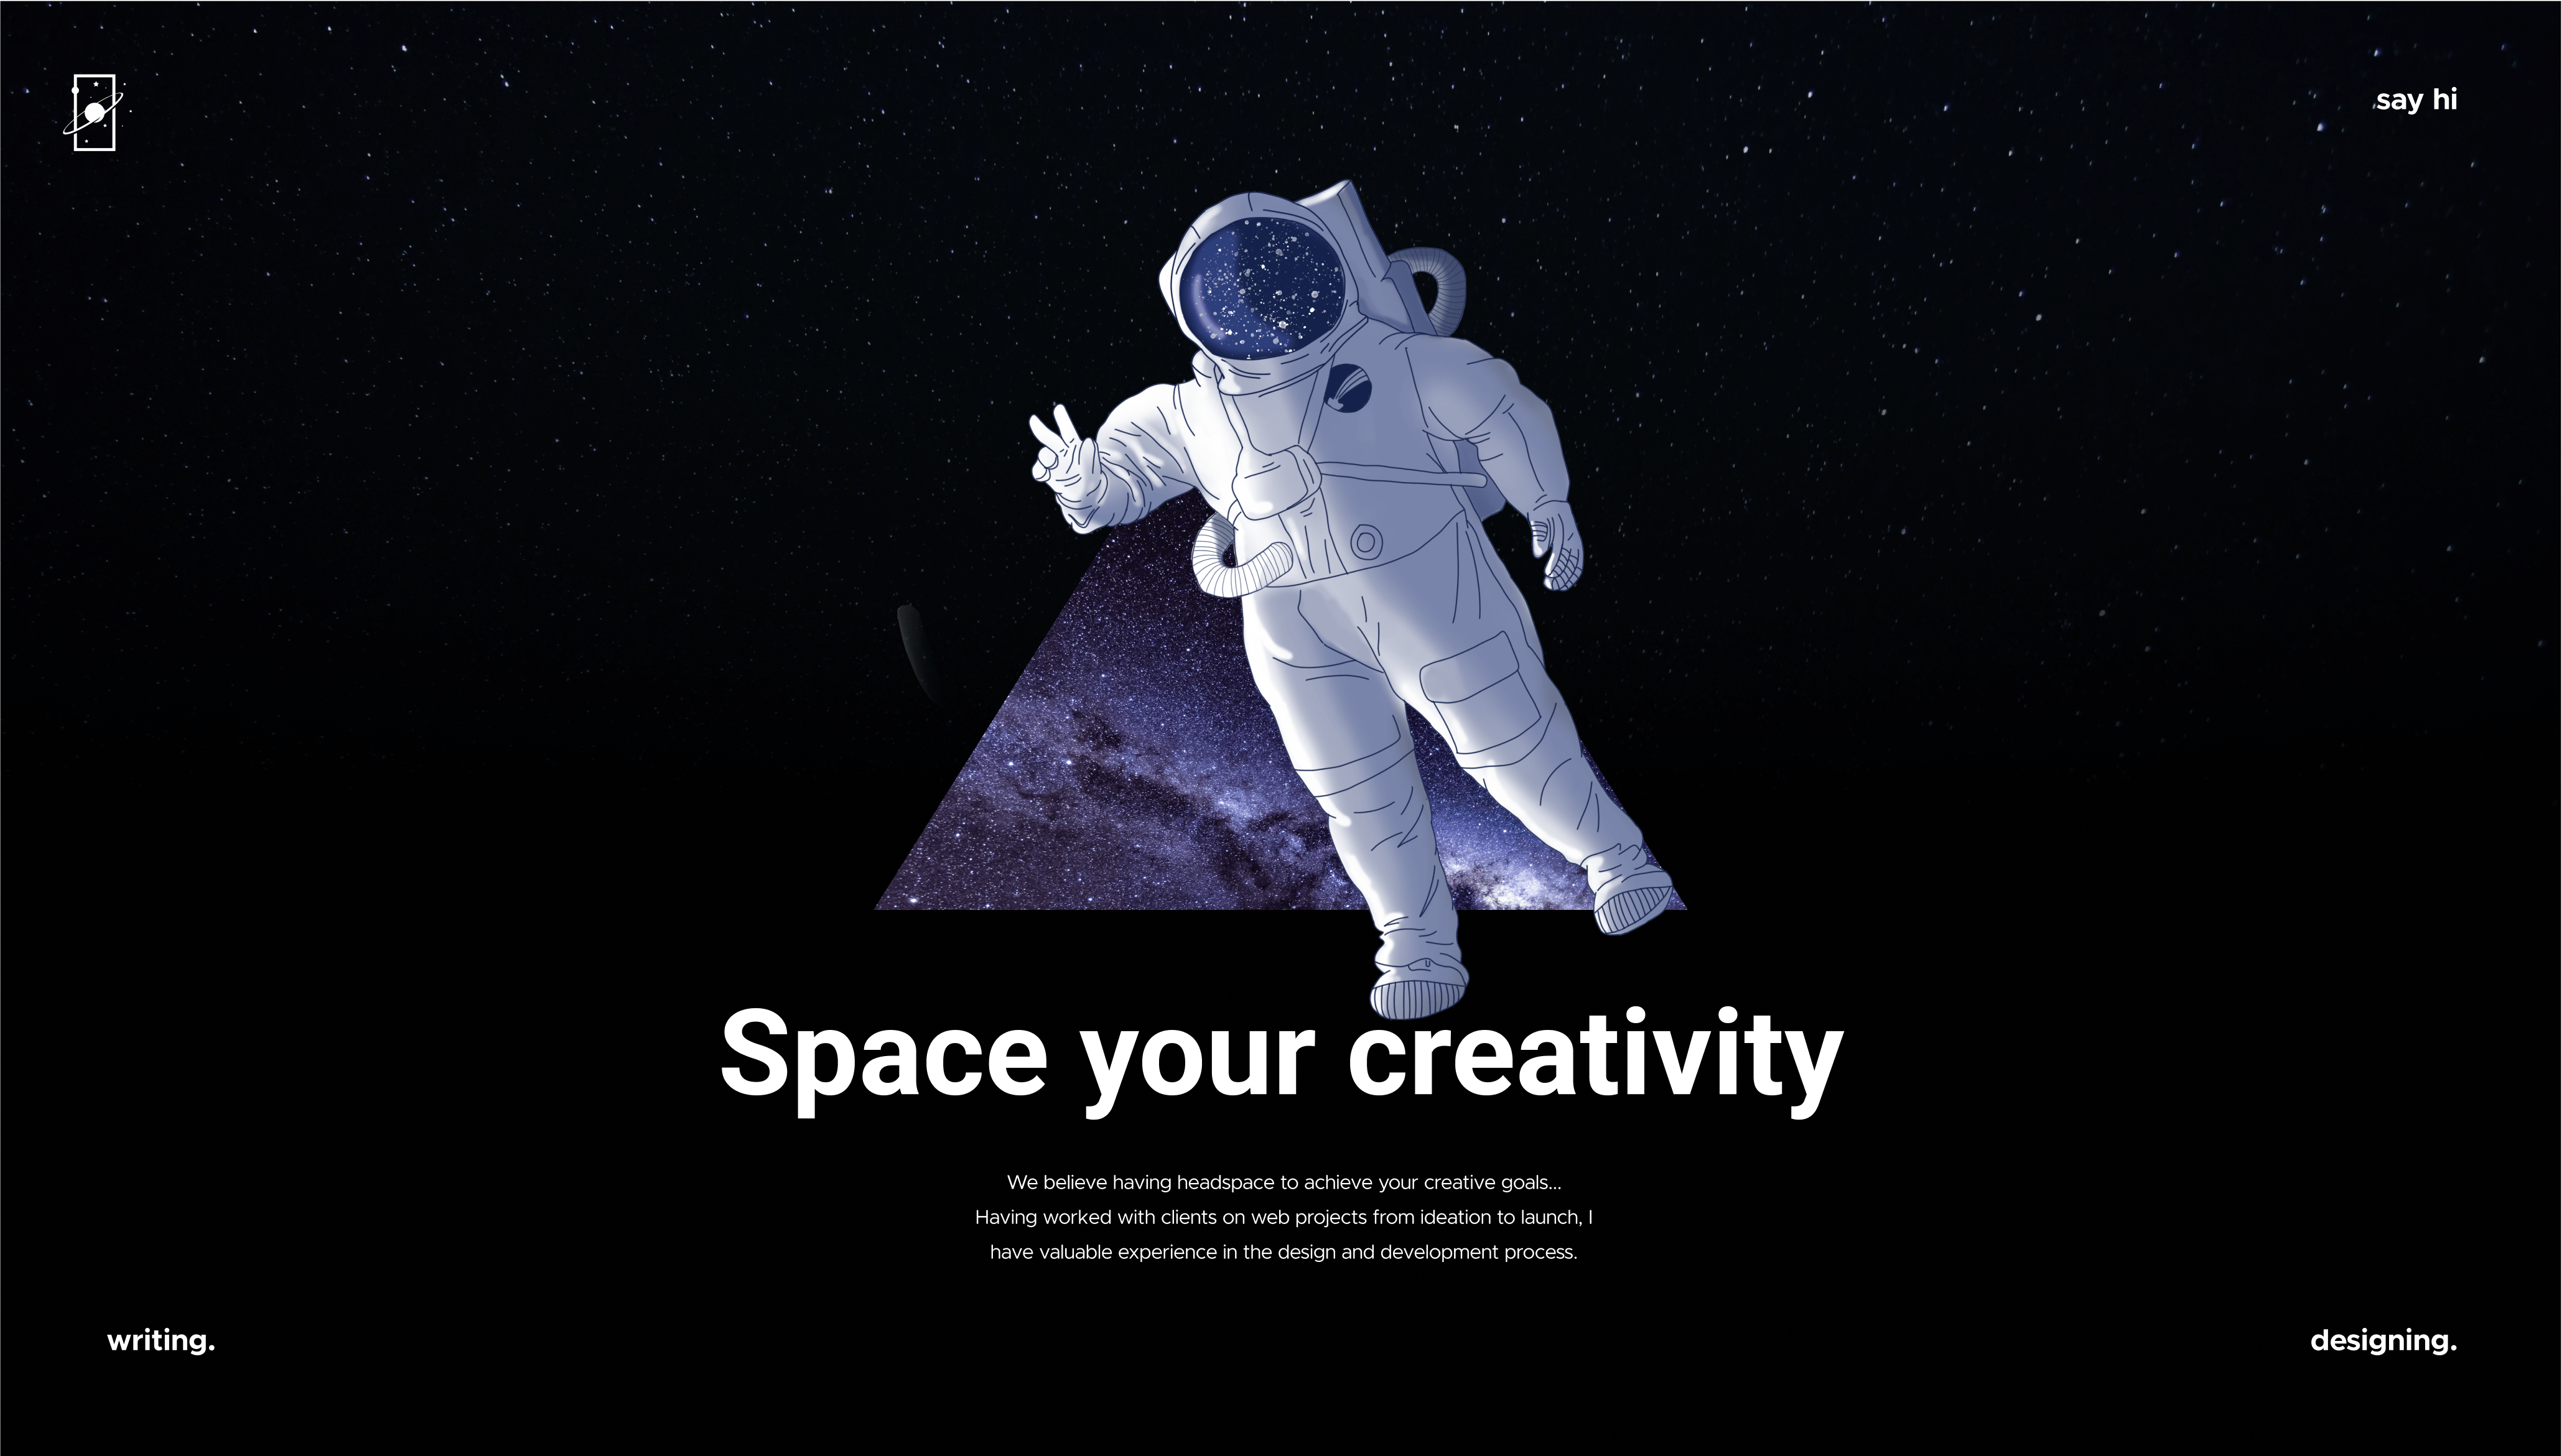 Space your creativity branding with spaceman character and space triangle